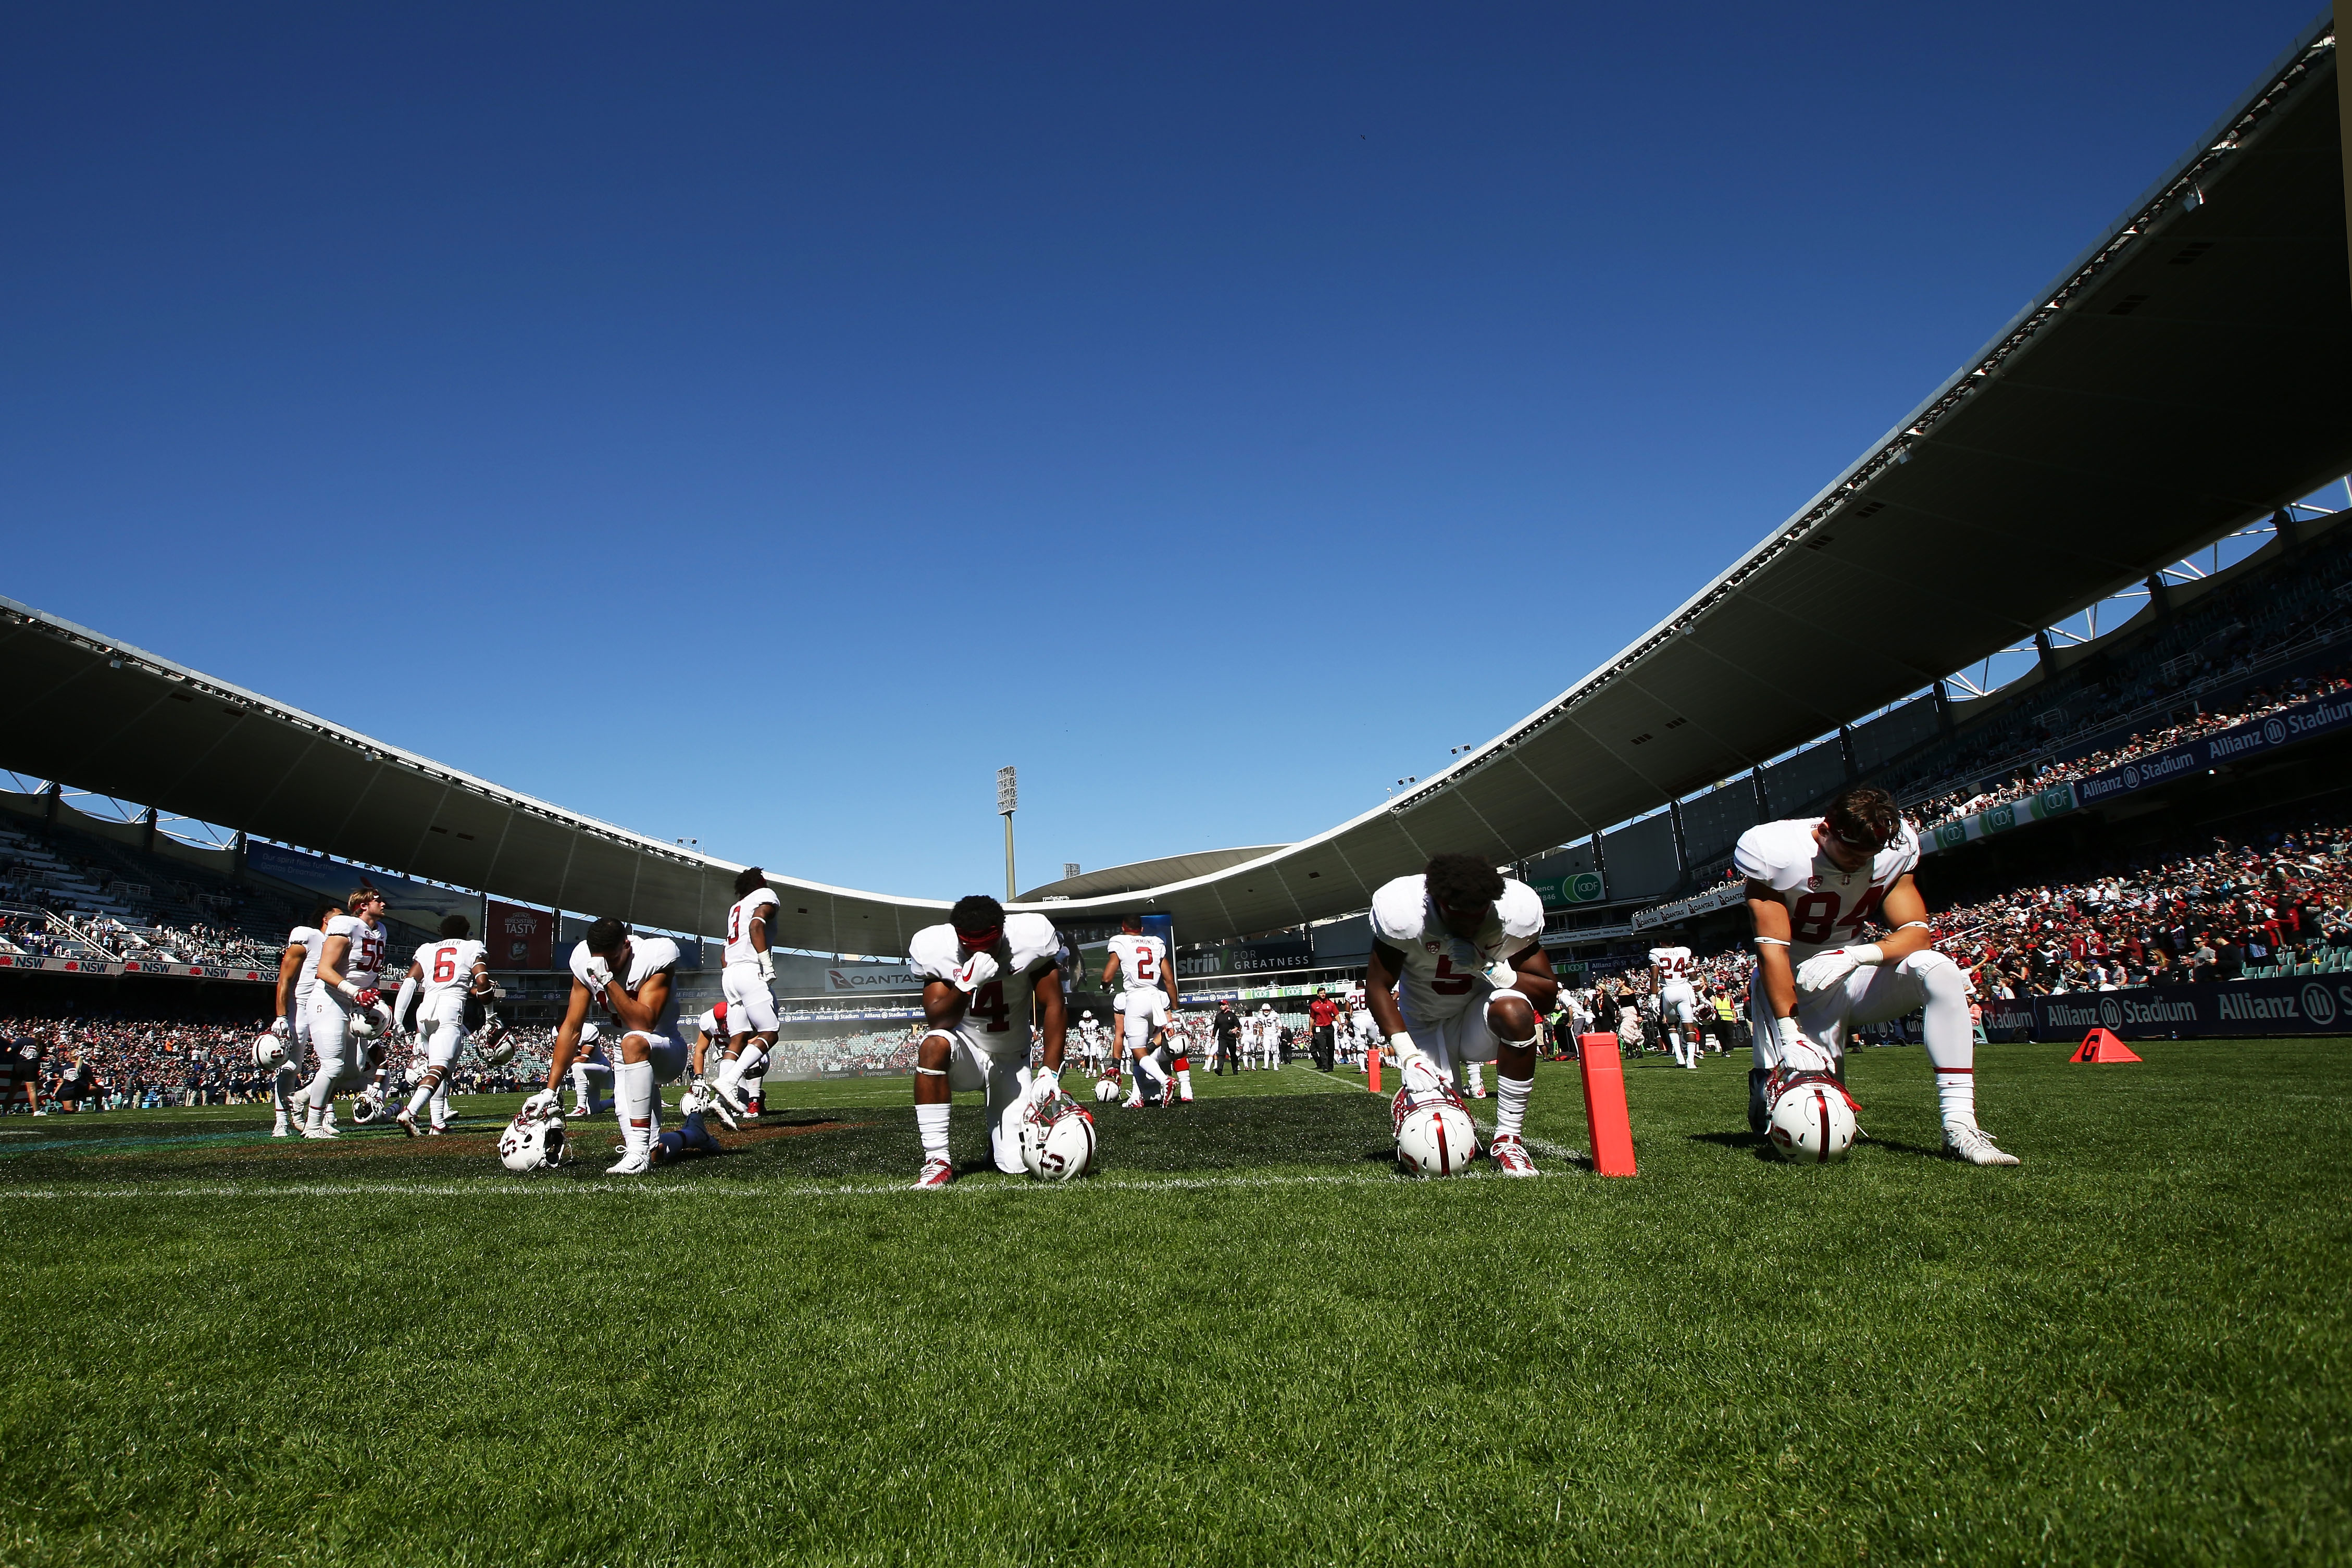 SYDNEY, AUSTRALIA - AUGUST 27:  The Stanford Cardinals prepare before the College Football Sydney Cup match between Stanford University (Stanford Cardinal) and Rice University (Rice Owls) at Allianz Stadium on August 27, 2017 in Sydney, Australia.  (Photo by Matt King/Getty Images)